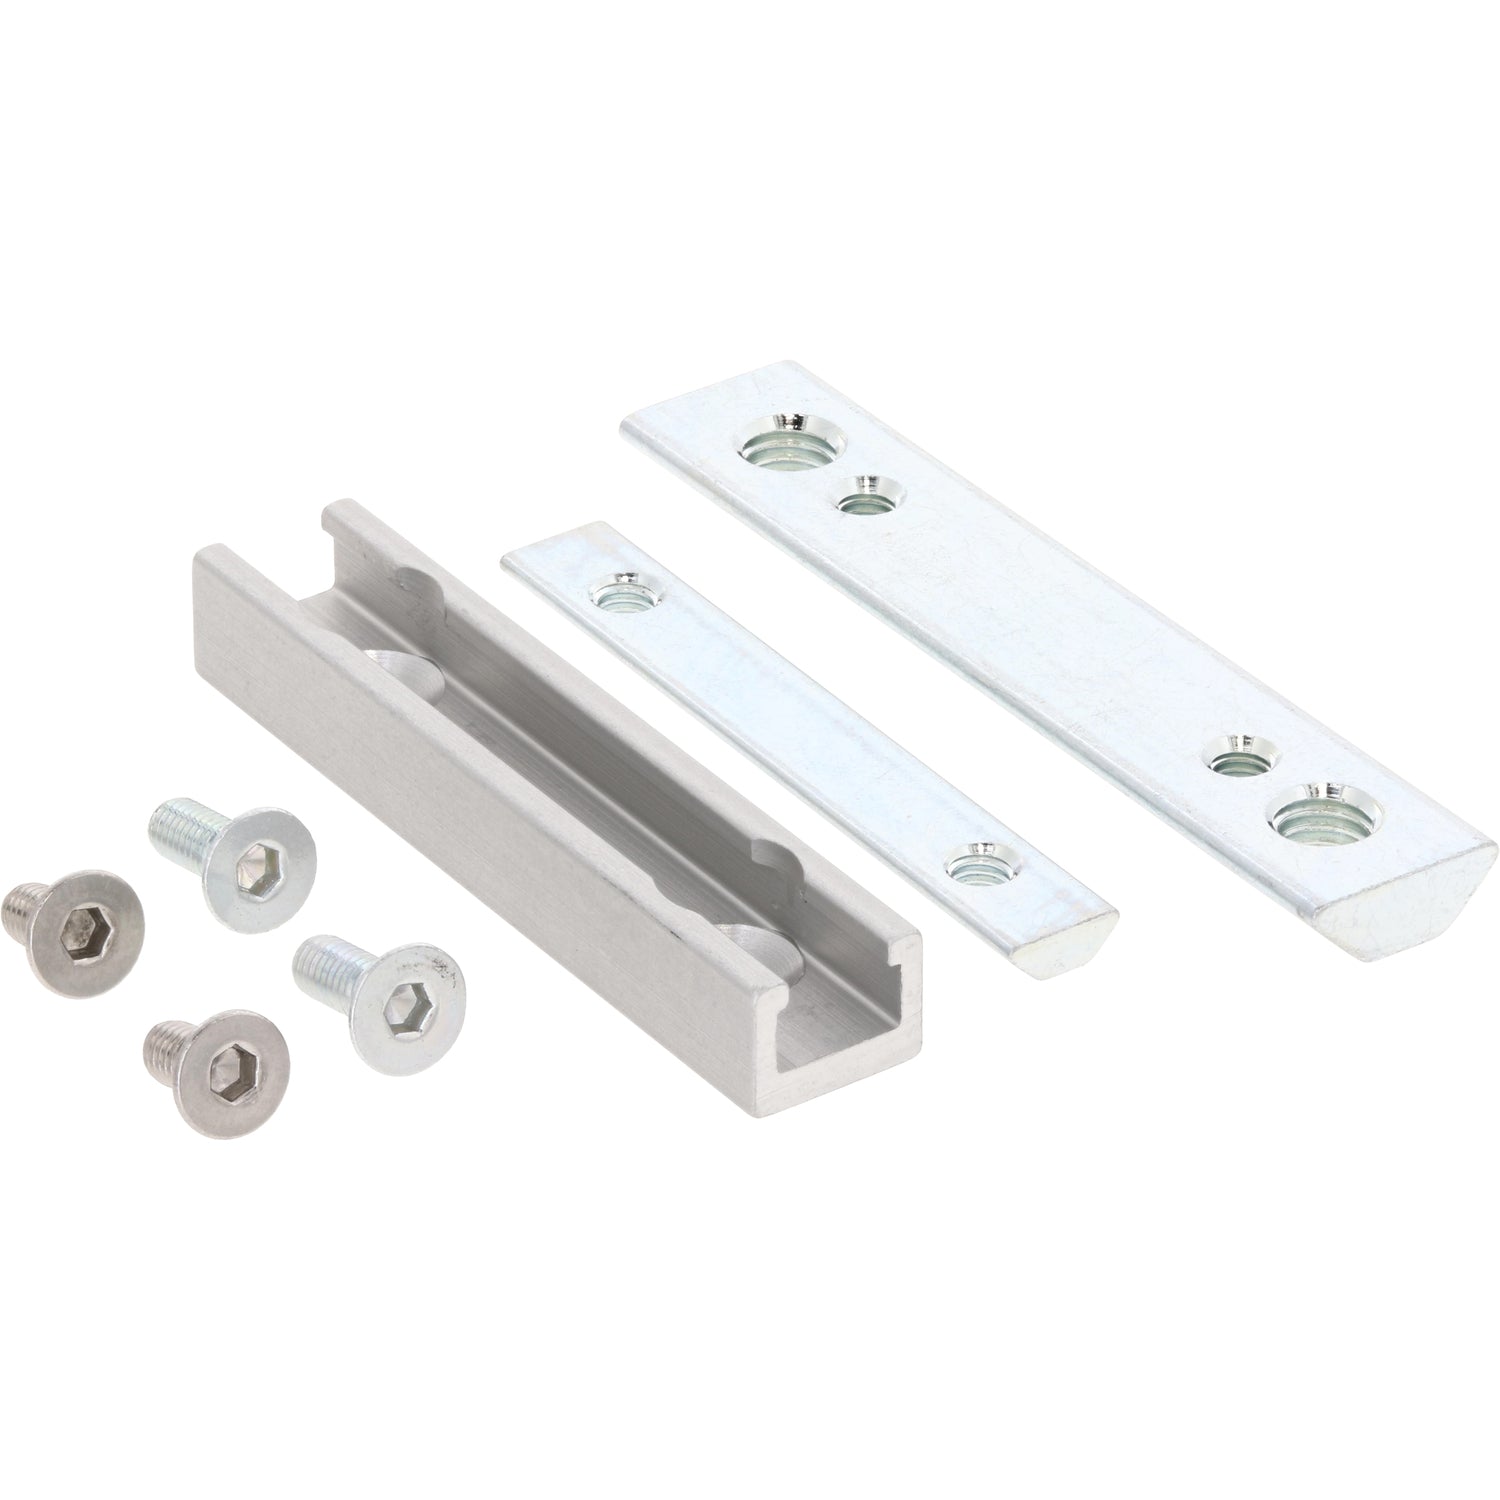 An aluminum slotted sensor bracket next to an assortment of fasteners. Parts shown on white background. 